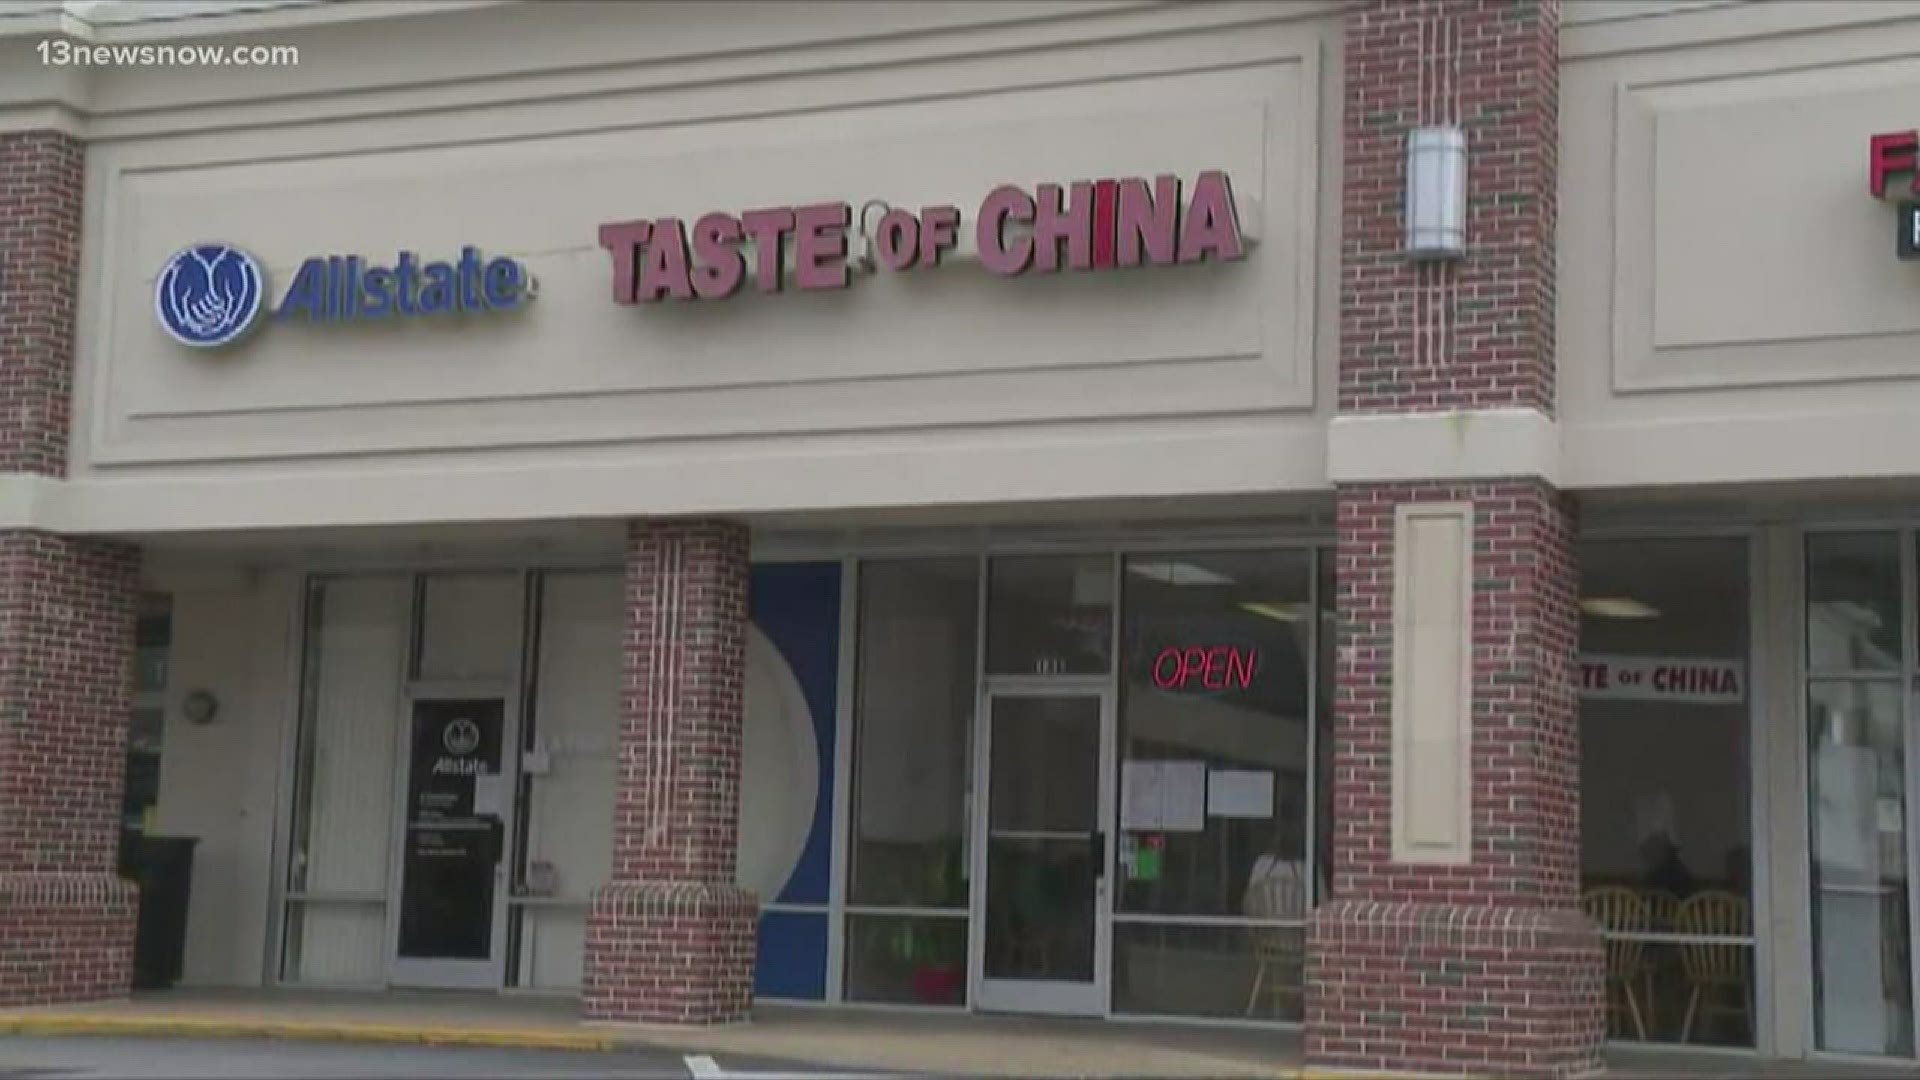 Neighbors in Chesapeake stepped up on Monday, after a hateful act against one of the owners of a Chinese food restaurant.